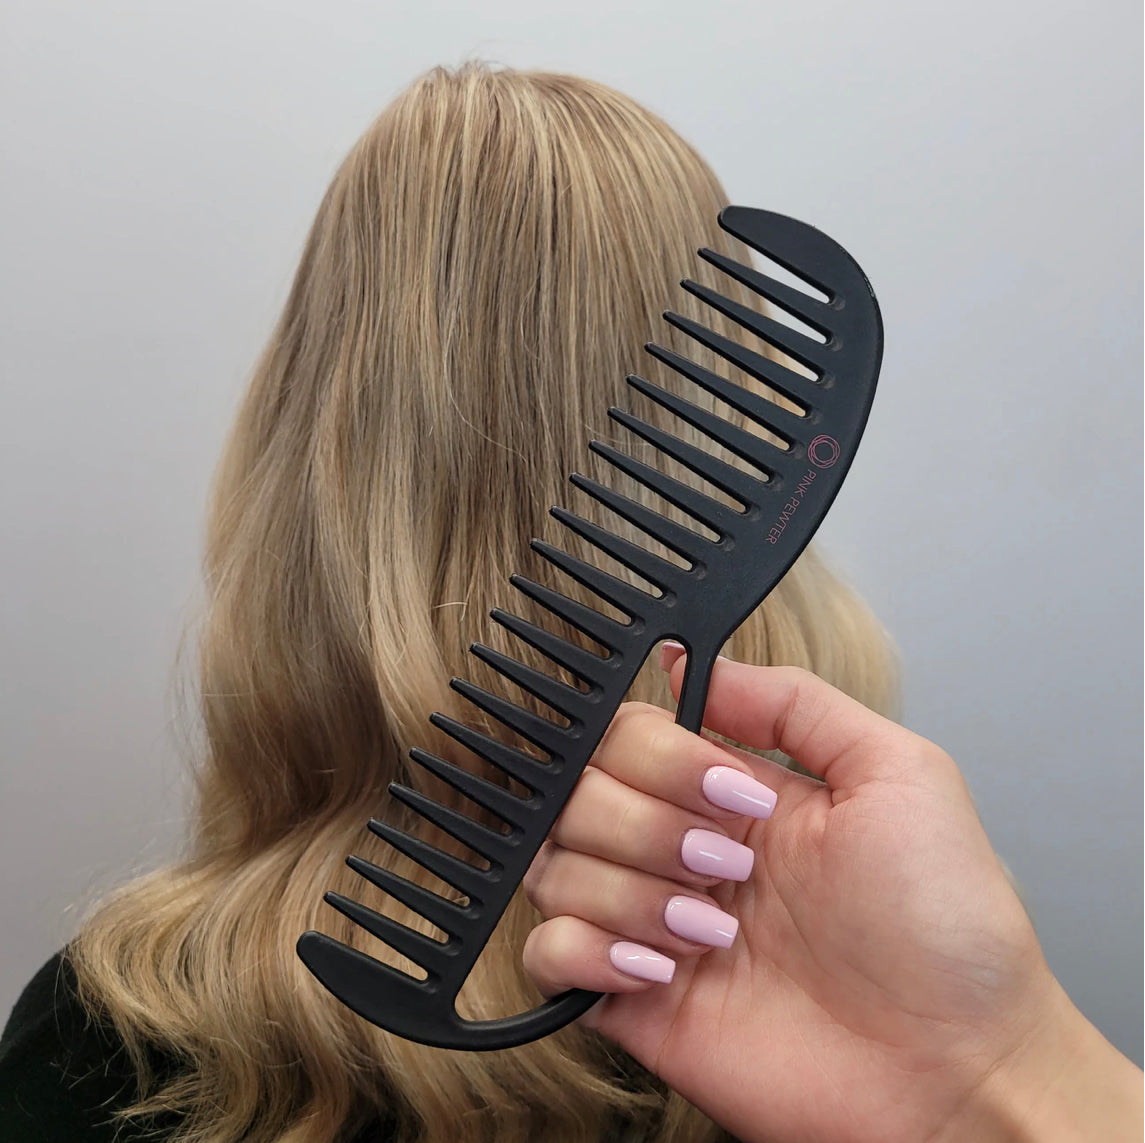 Pink Pewter "Never Let Go" Carbon Fibre Detangling and Styling Comb Black #4 X Phoenix Nationale